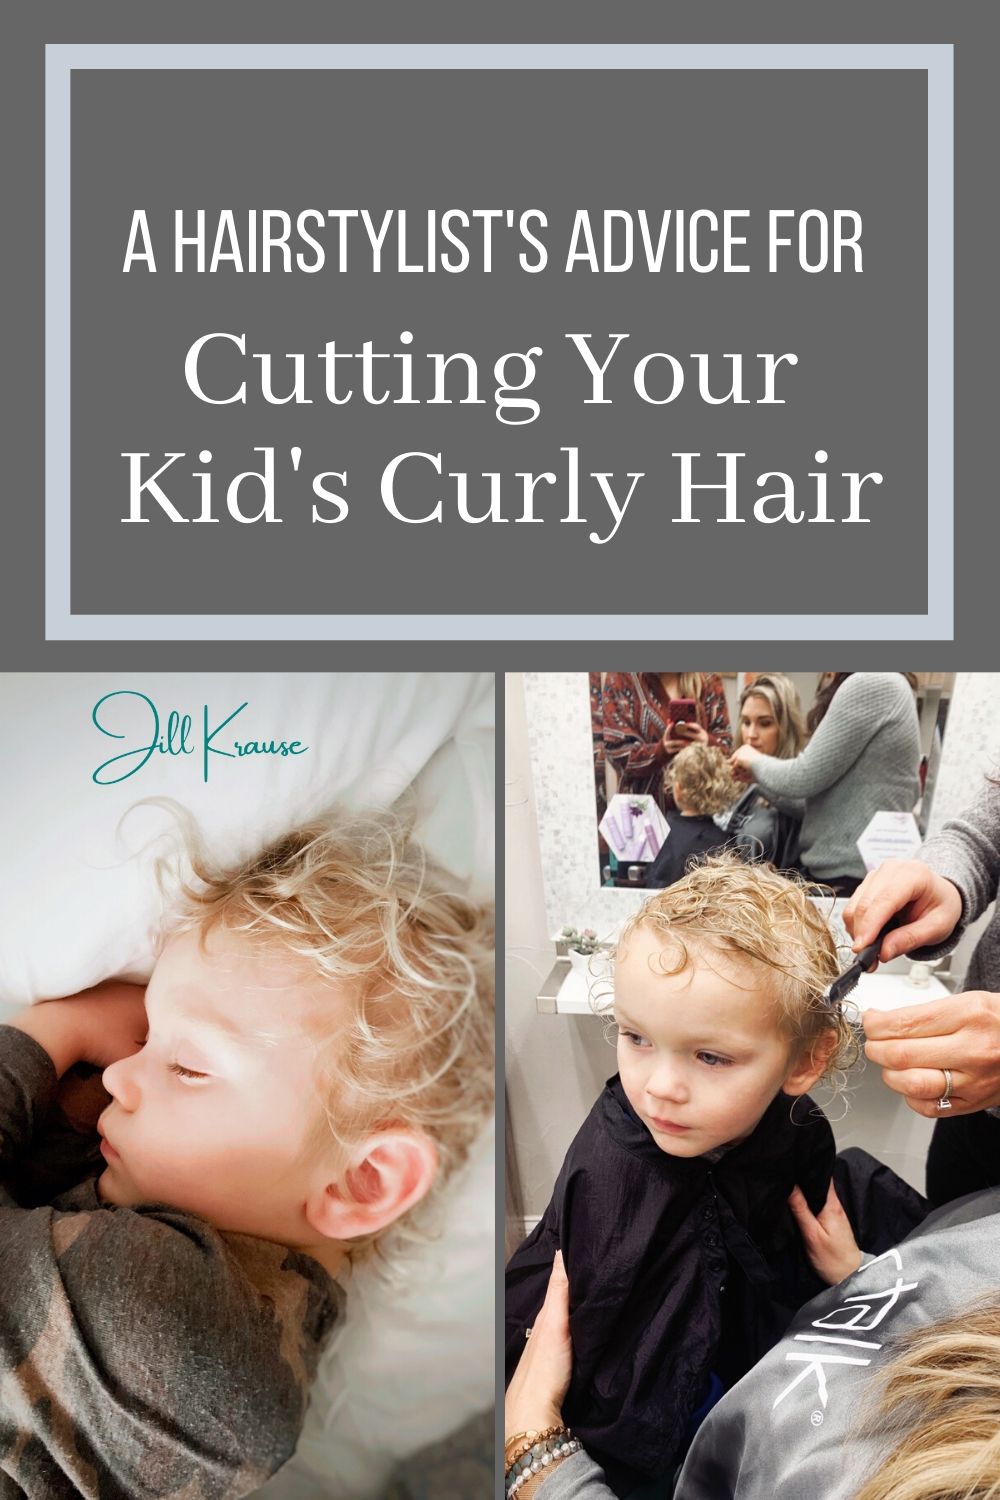 A Hairstylist's Advice For Cutting Your Kid's Curly Hair | JillKrause.com